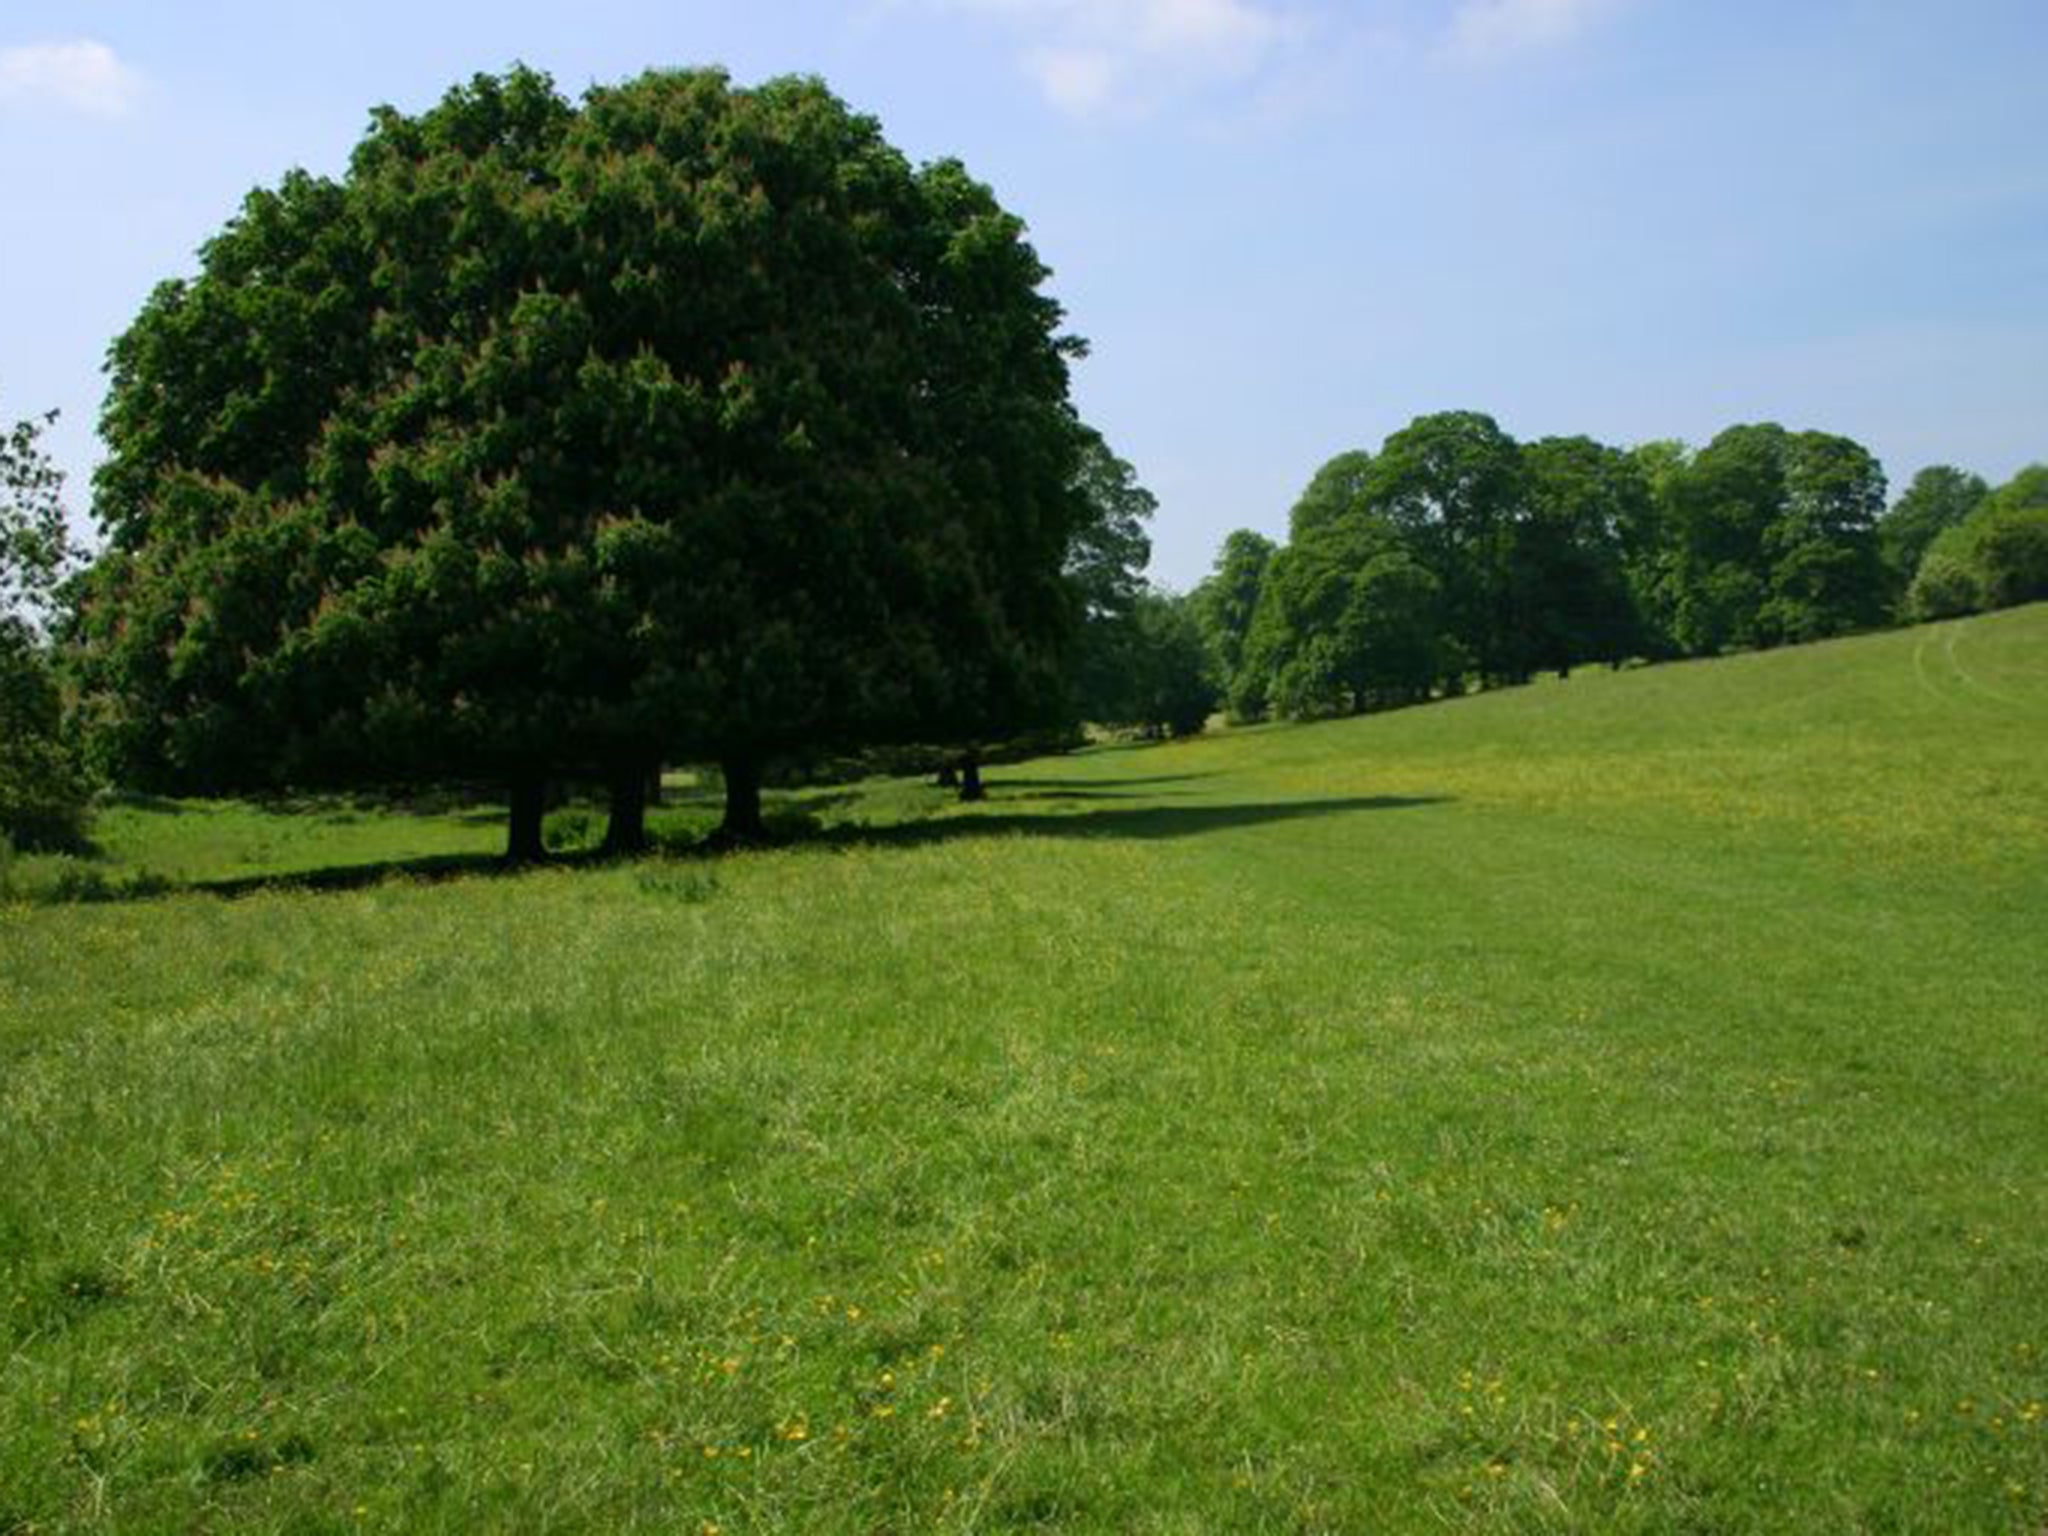 The original field in High Wycombe, which is used as the banner image on a number of websites belonging to local Tory associations